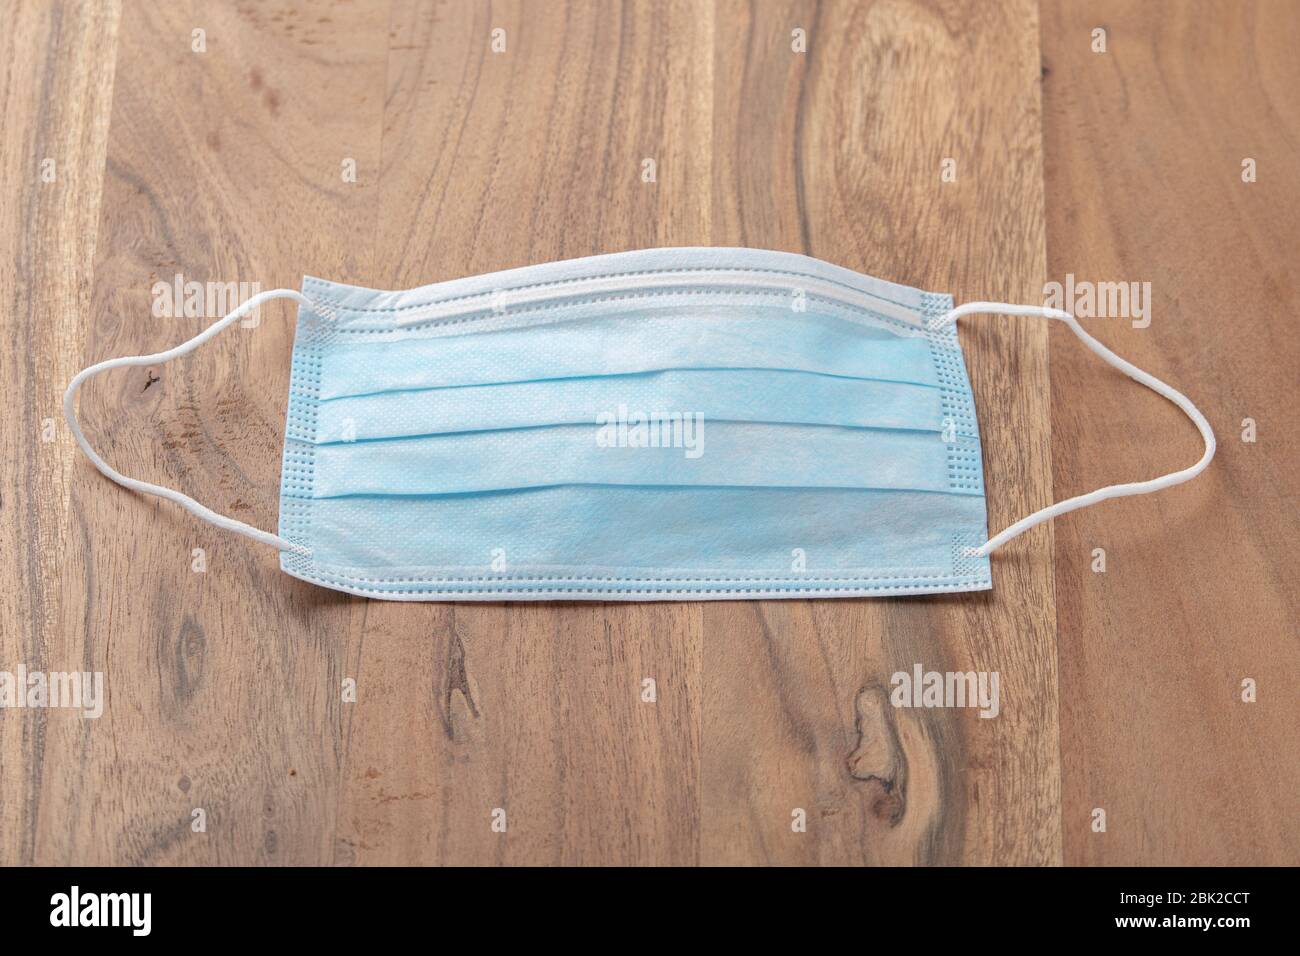 Photo of a blue surgical mask placed on a wooden table made of solid brown oak. The mask with its blue side facing upwards and is ready to be used. Stock Photo